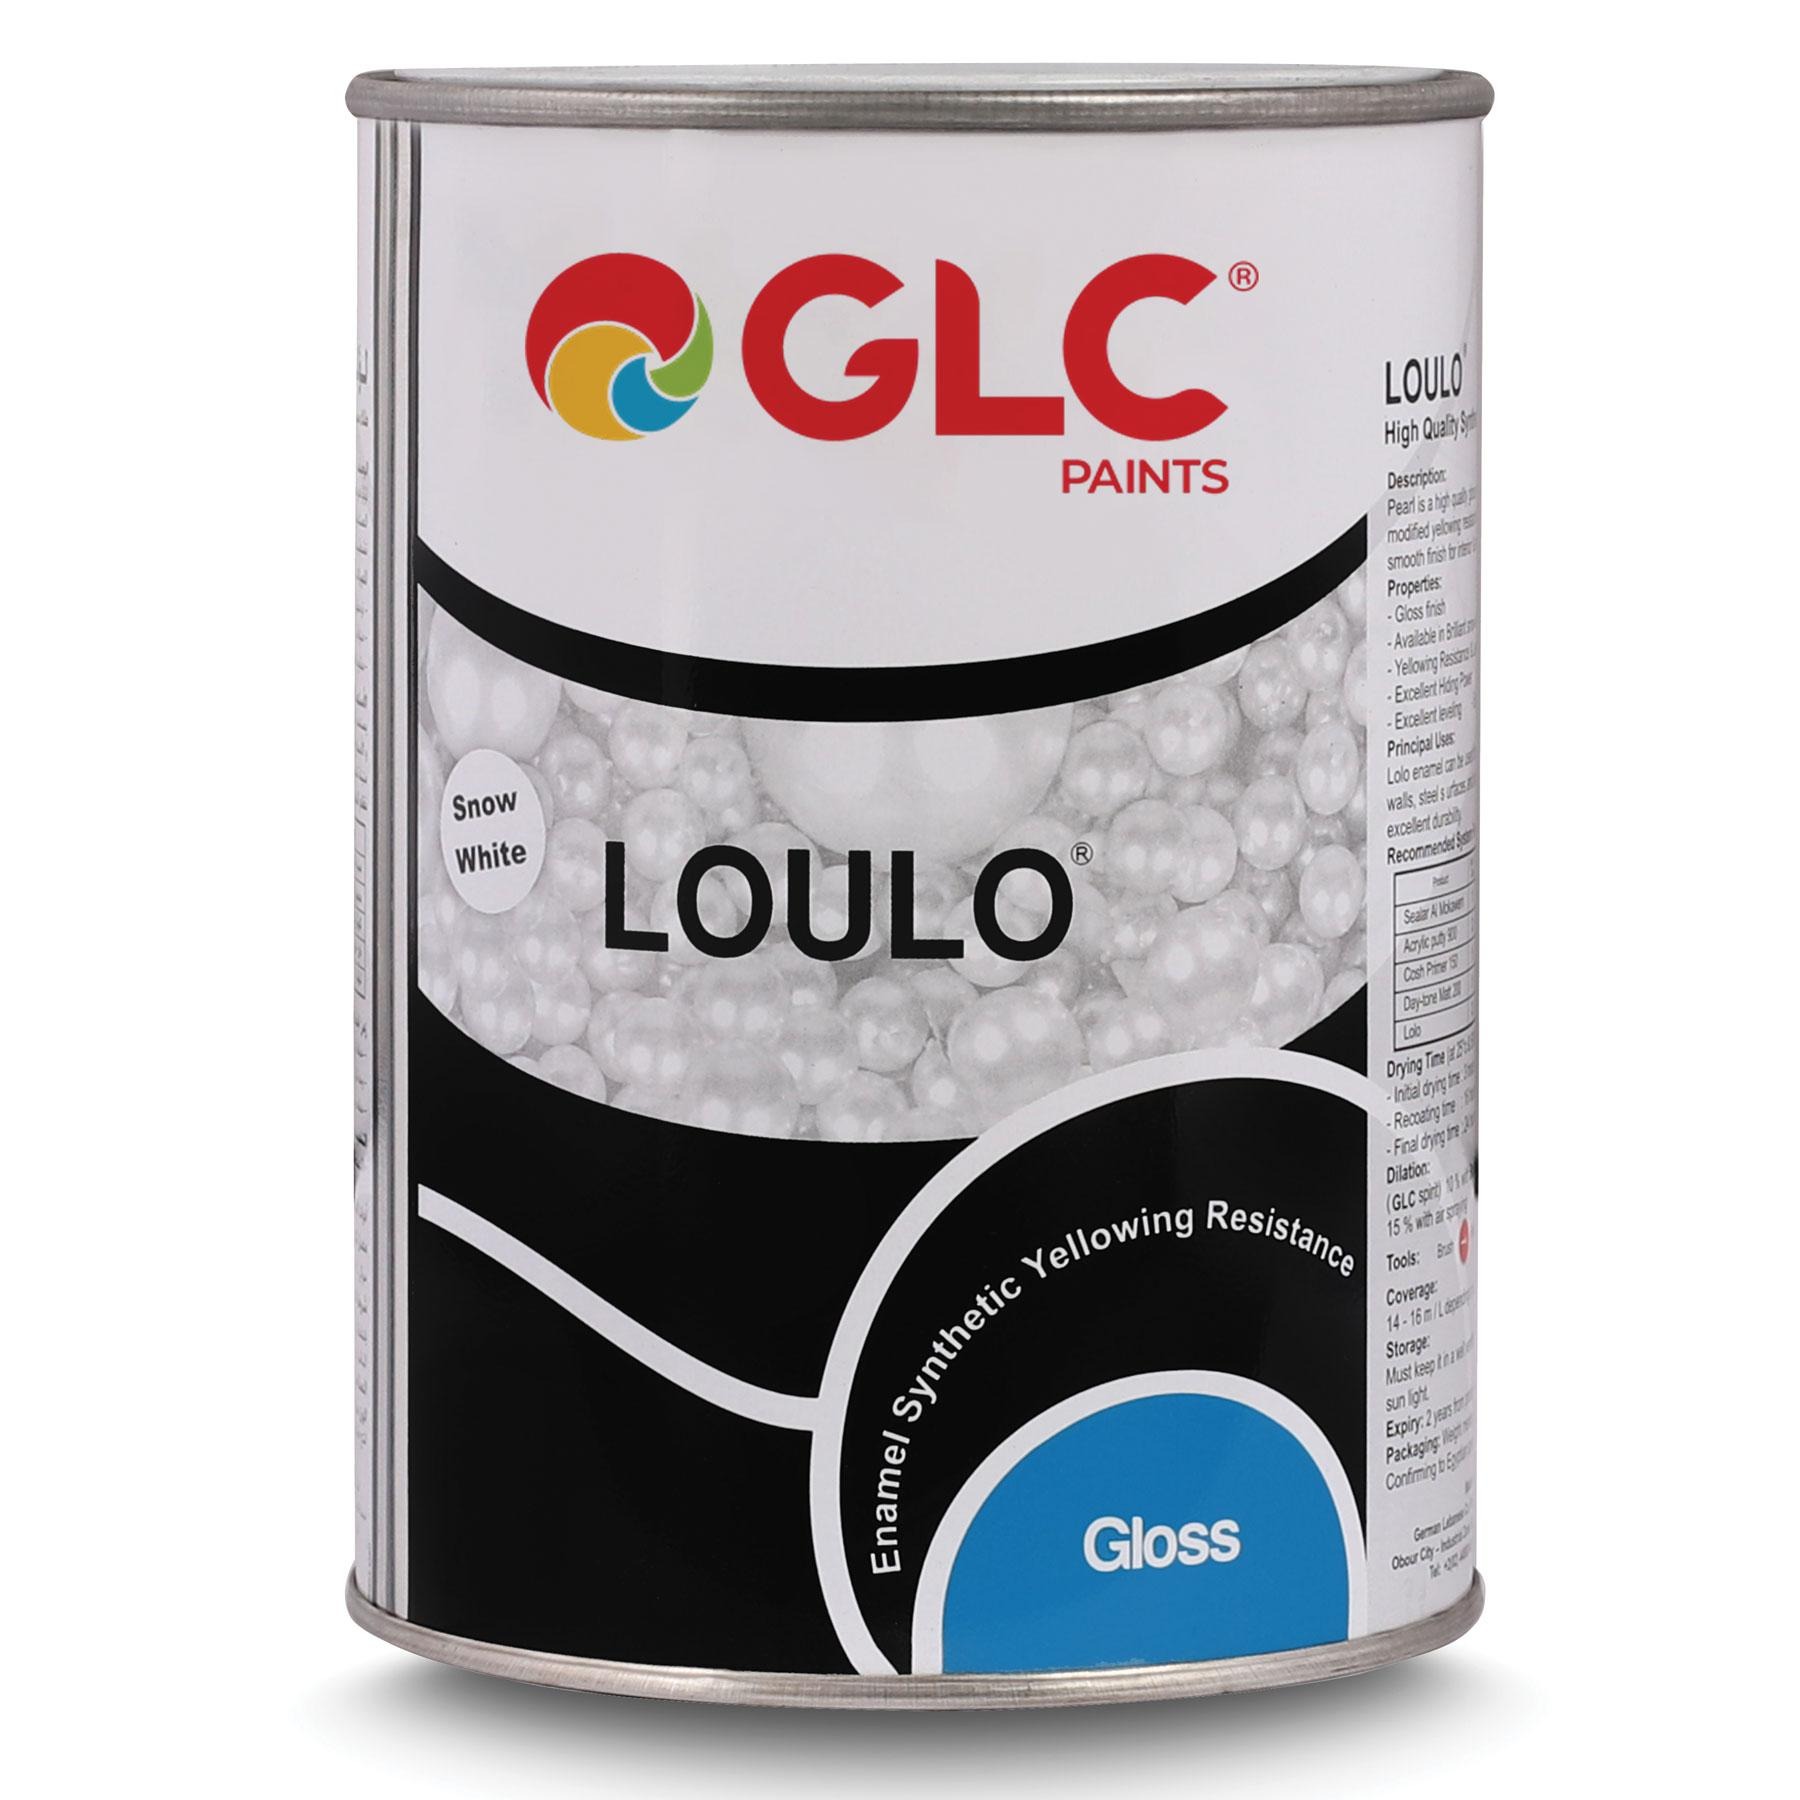 Loulo Painting - 3.75 Liter